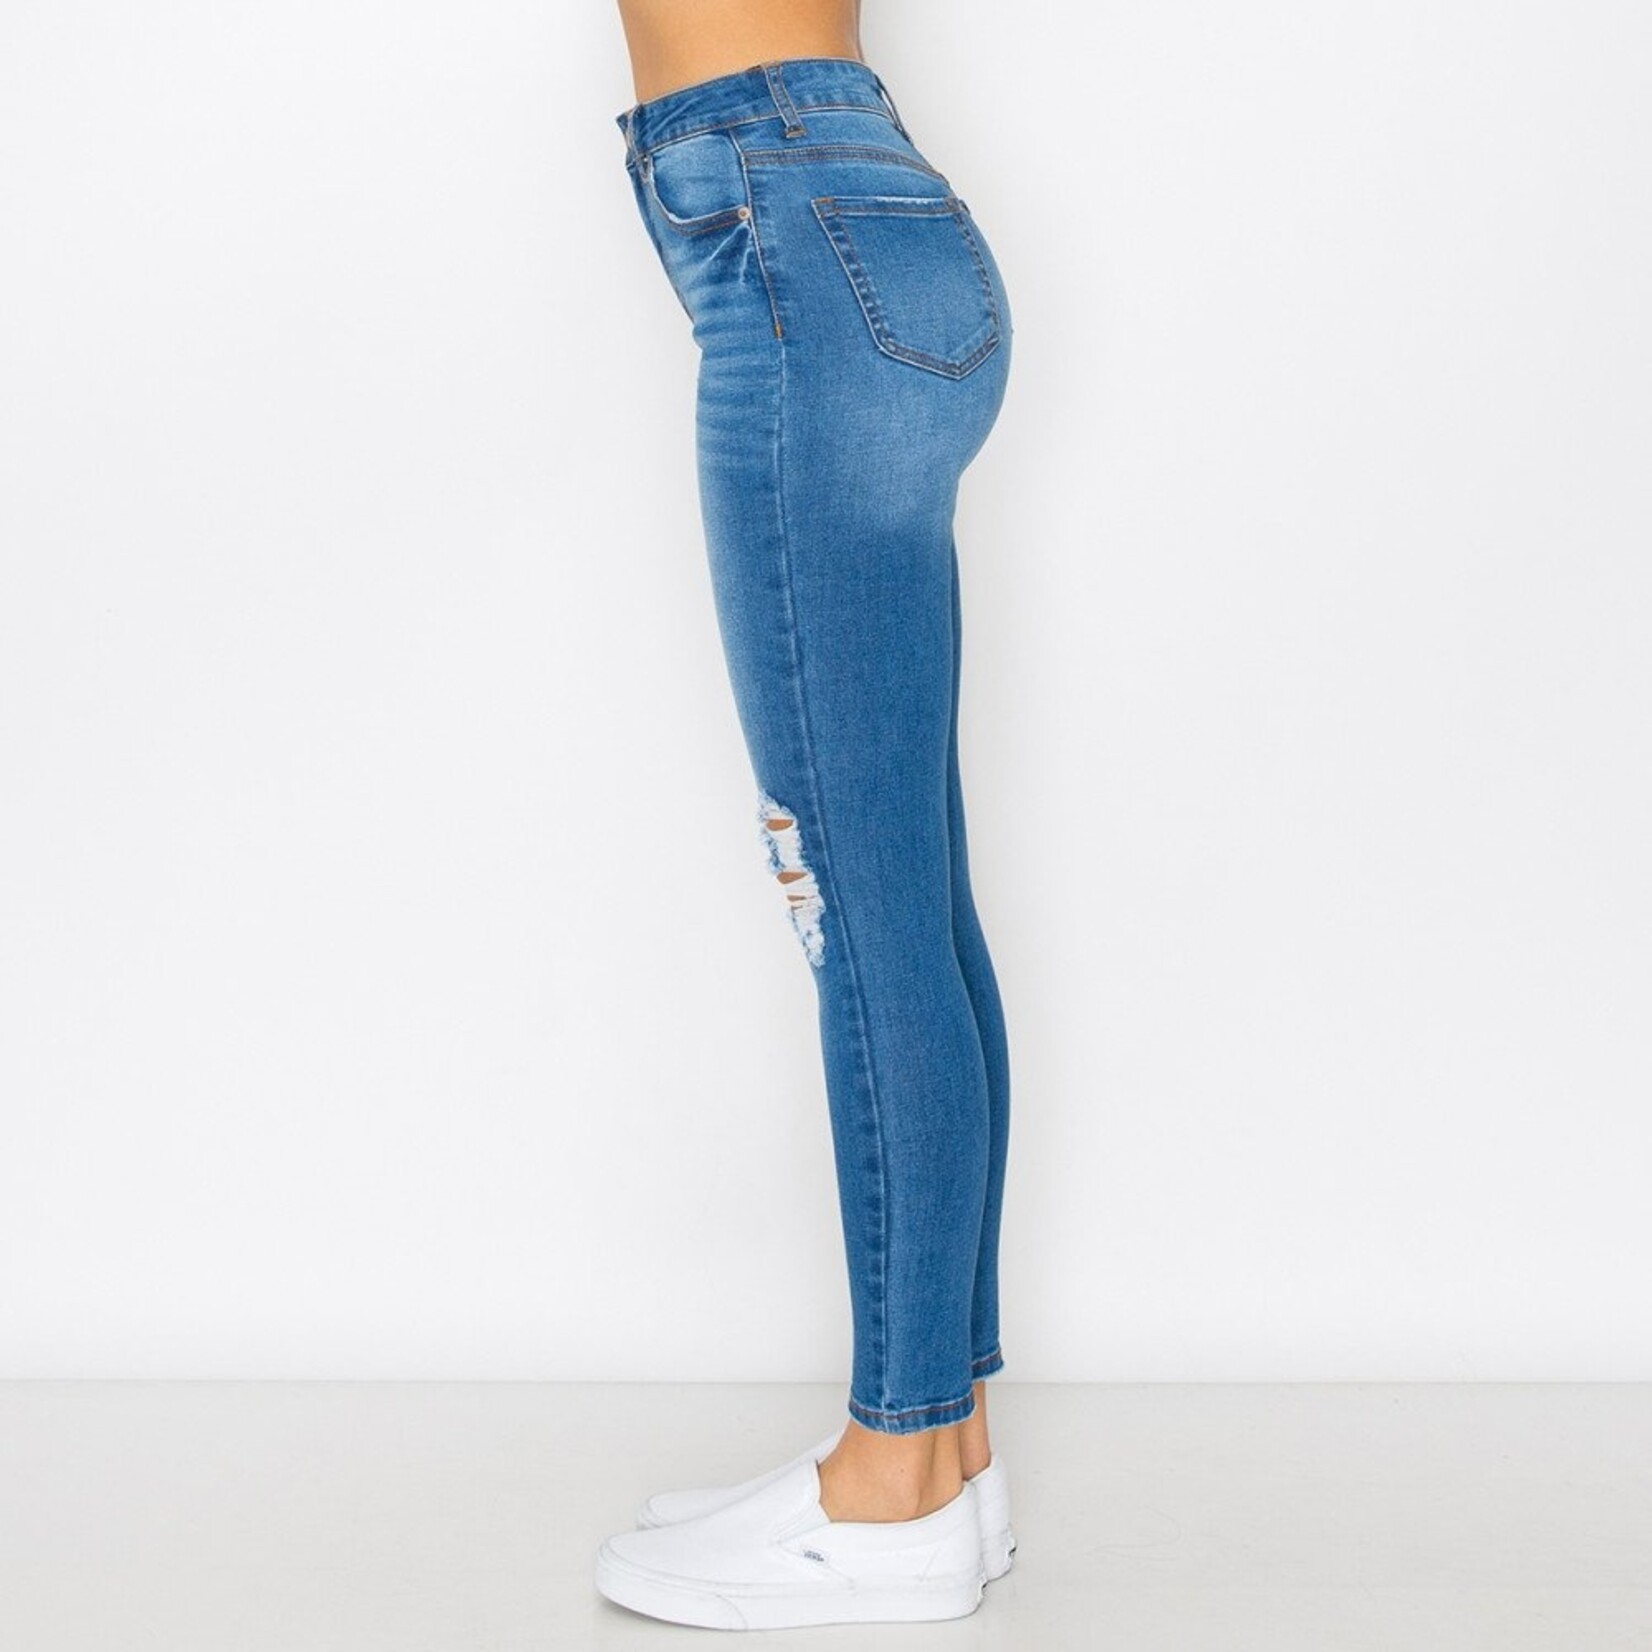 Wax Jeans Wax Jean - High-Rise Knee Destructed Skinny W/ 3D Whiskers - 90297